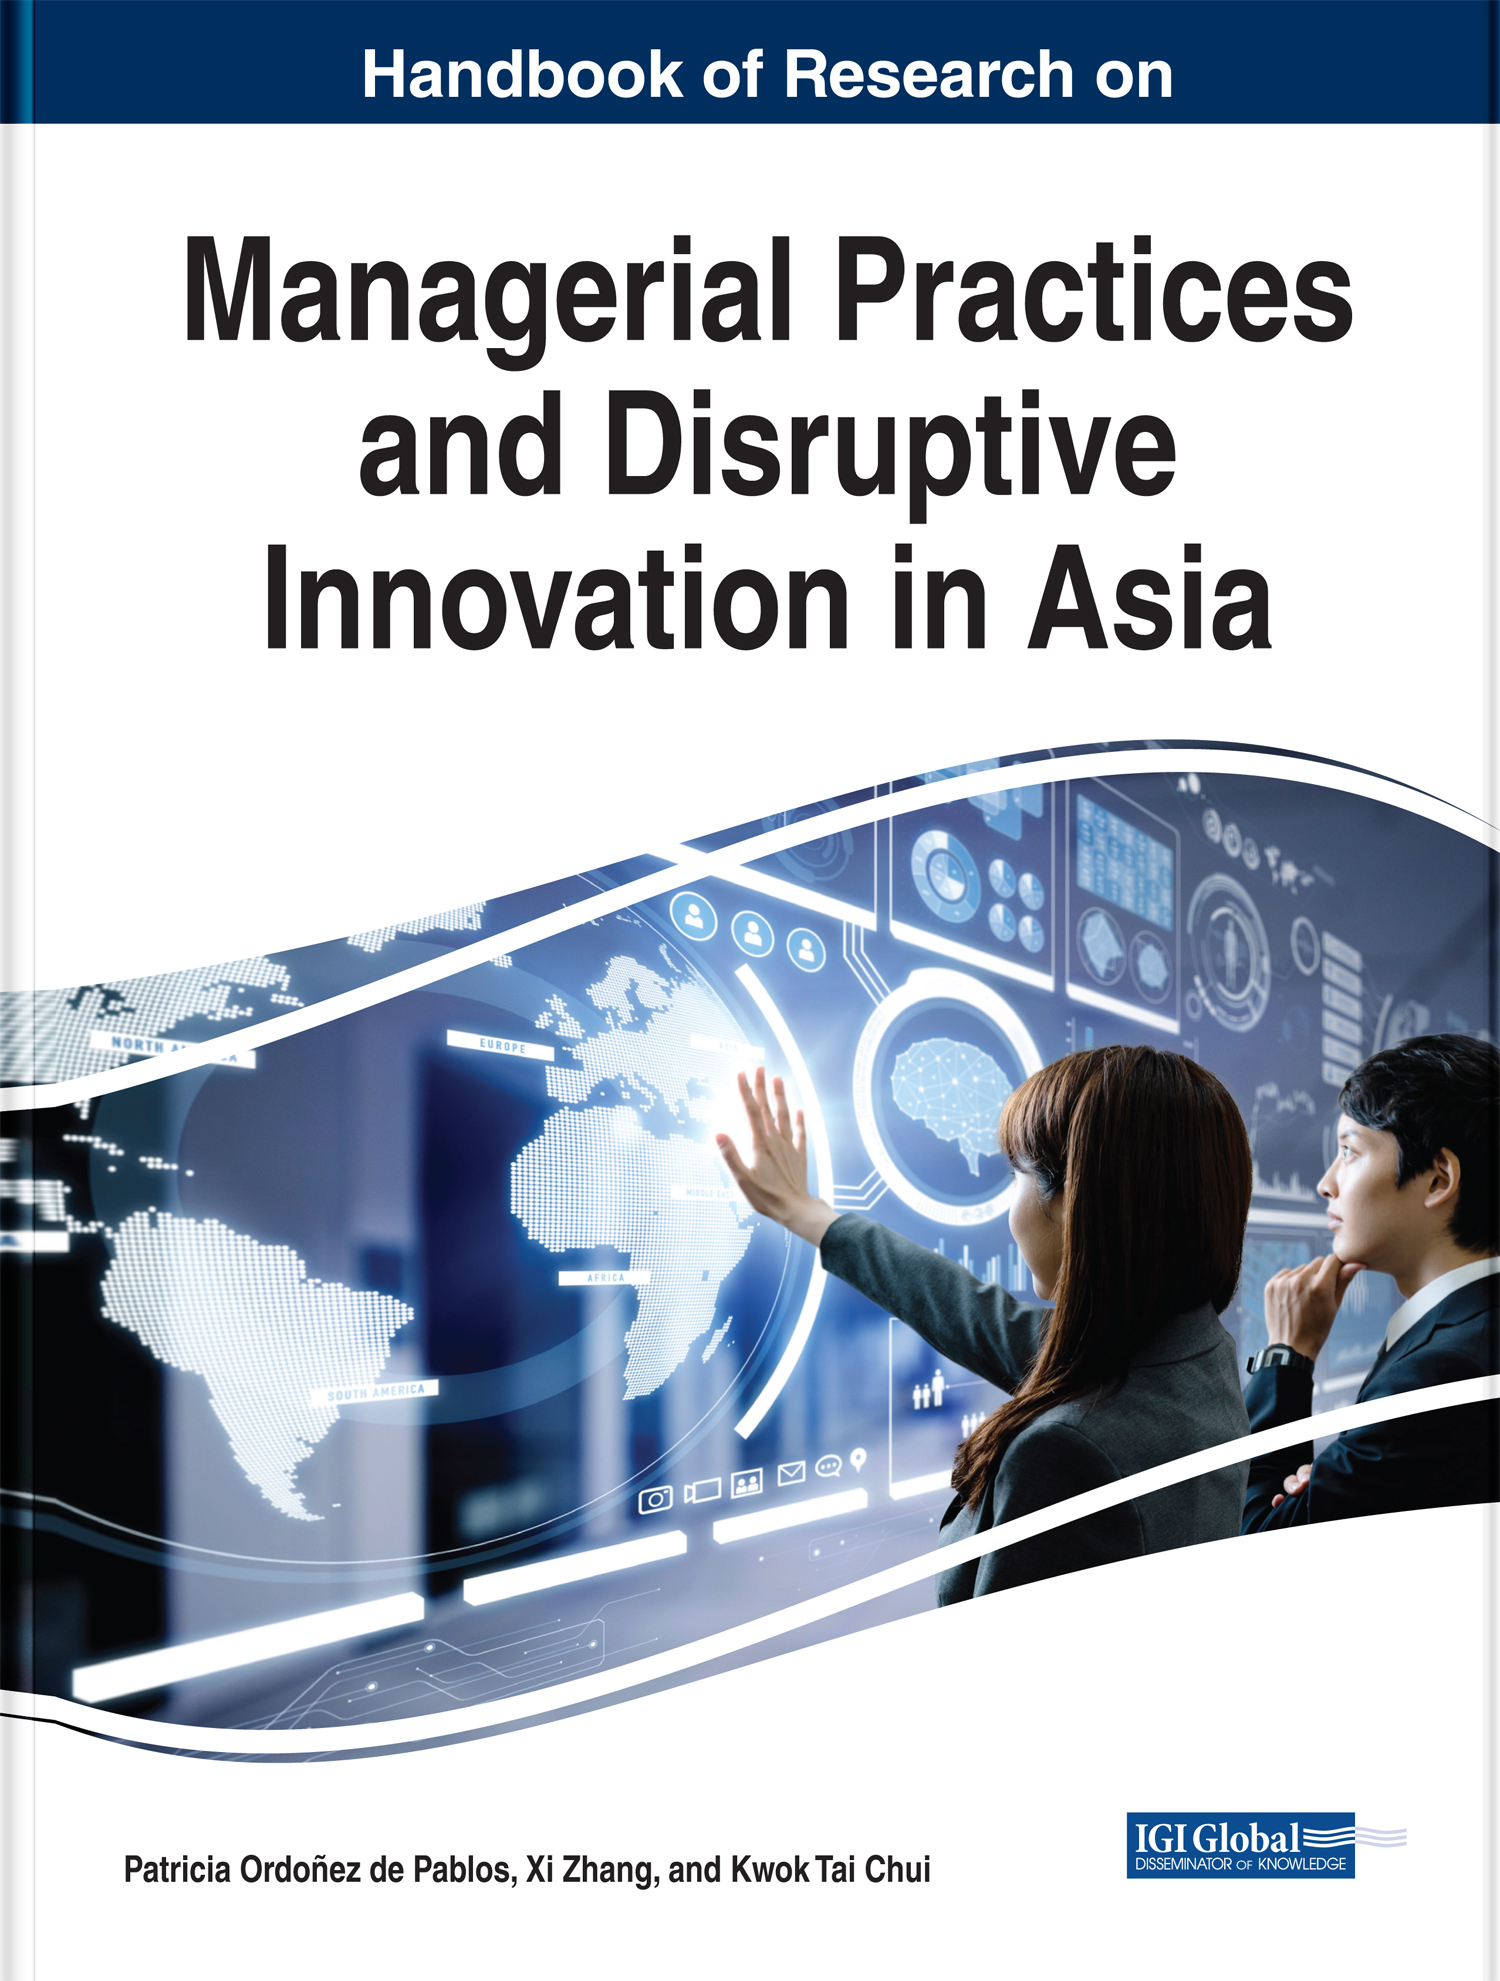 Handbook of Research on Managerial Practices and Disruptive Innovation in Asia - photo 1